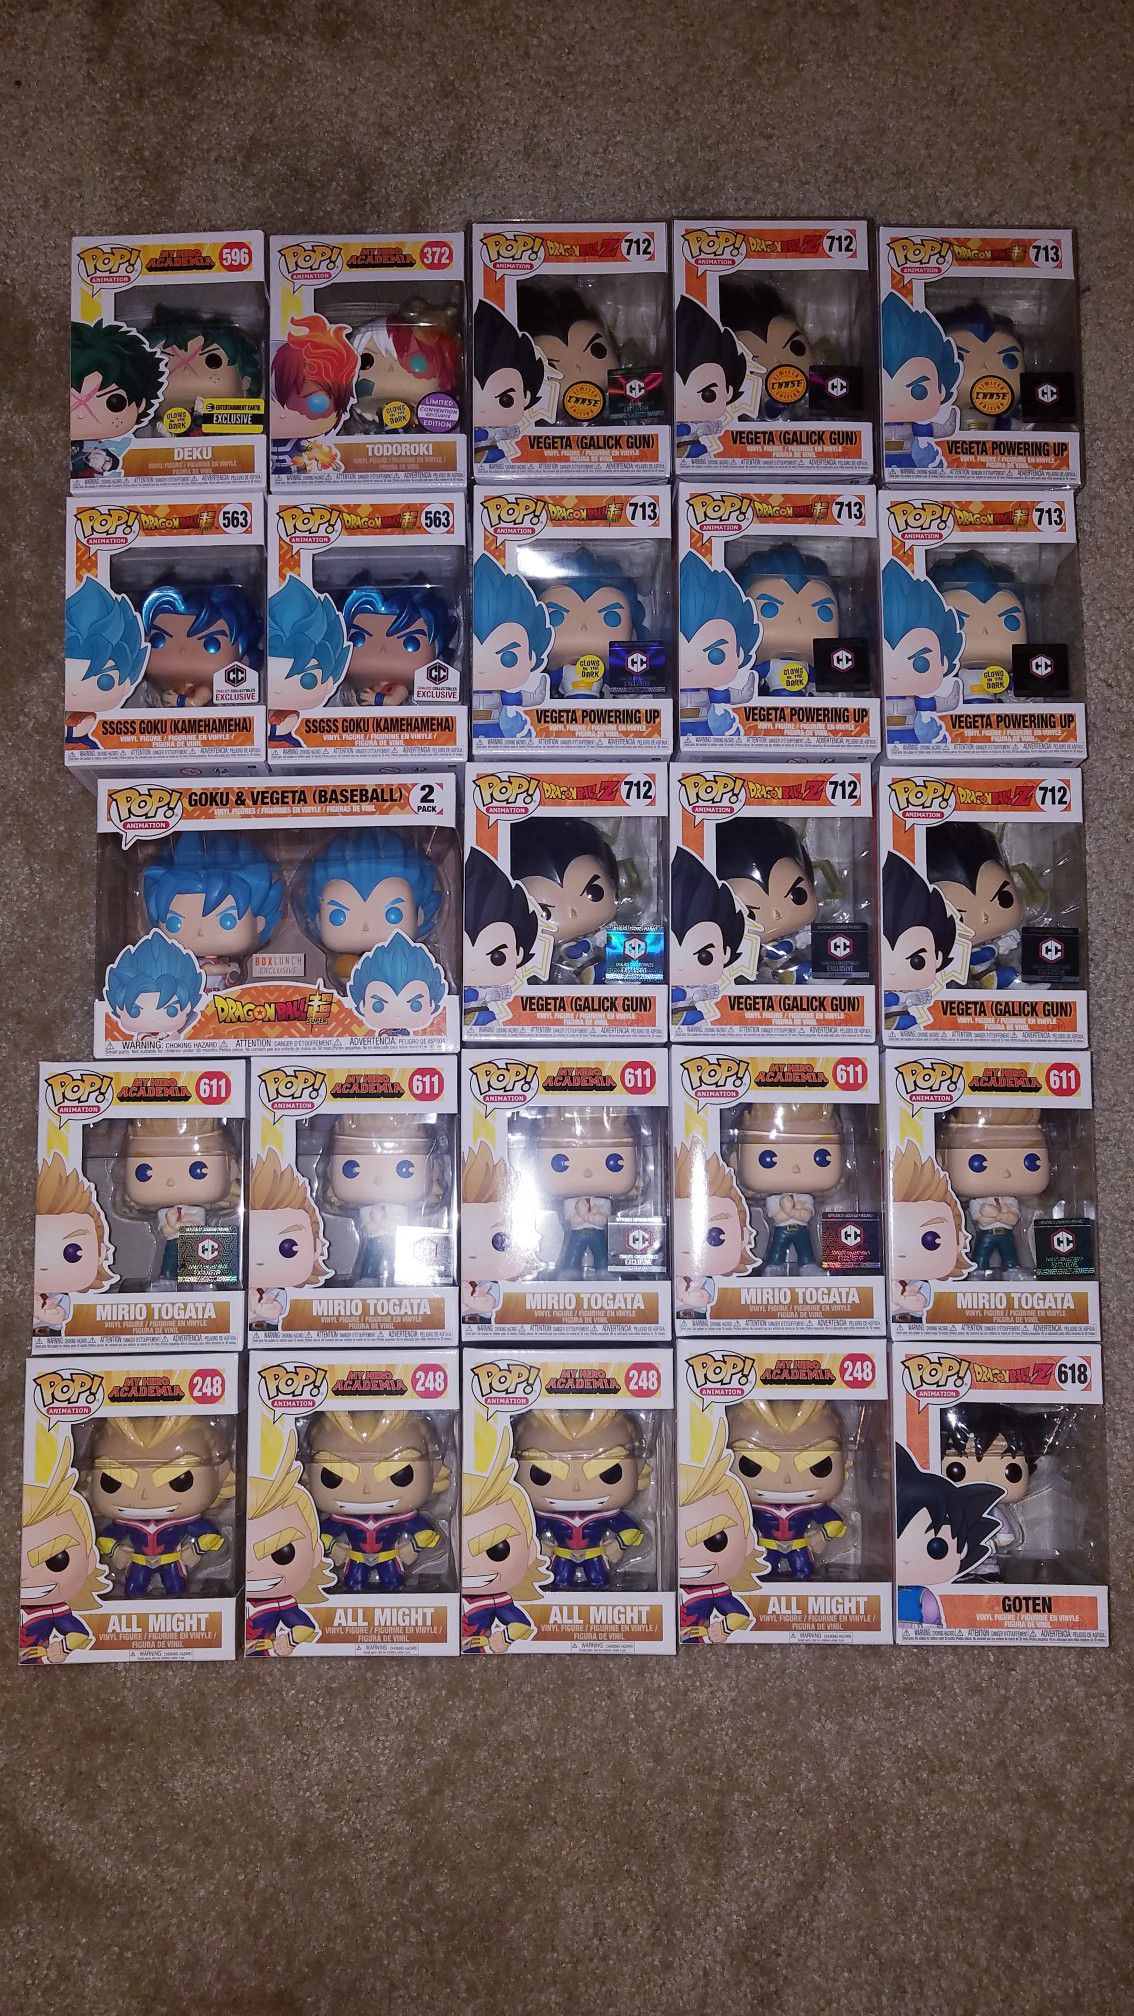 Selling a Large Lot of Dragonball Z and My Hero Academia Funko Pops